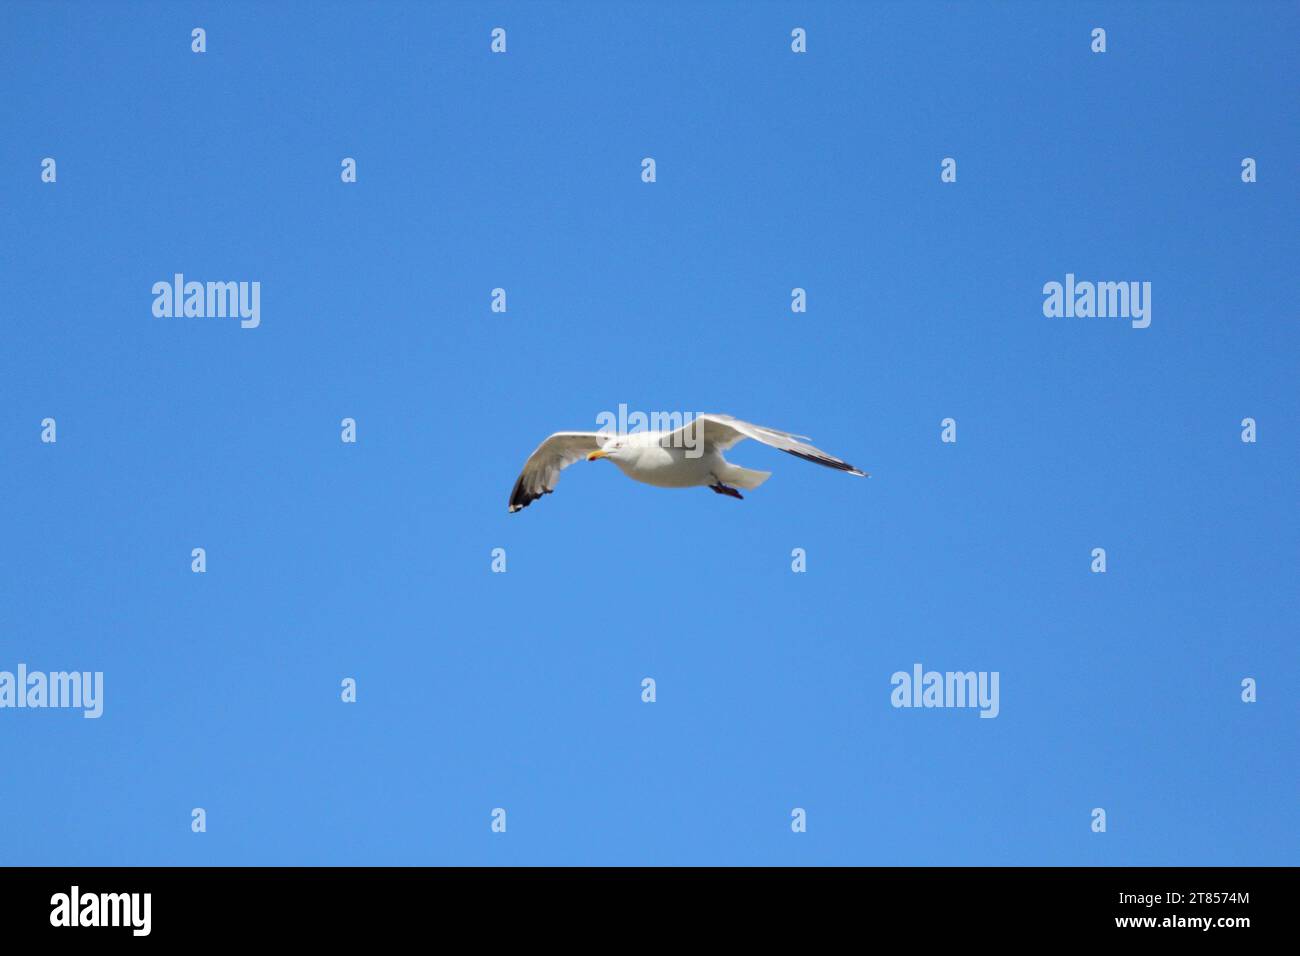 Close-up of a flying gull, with blue sky in the background Stock Photo